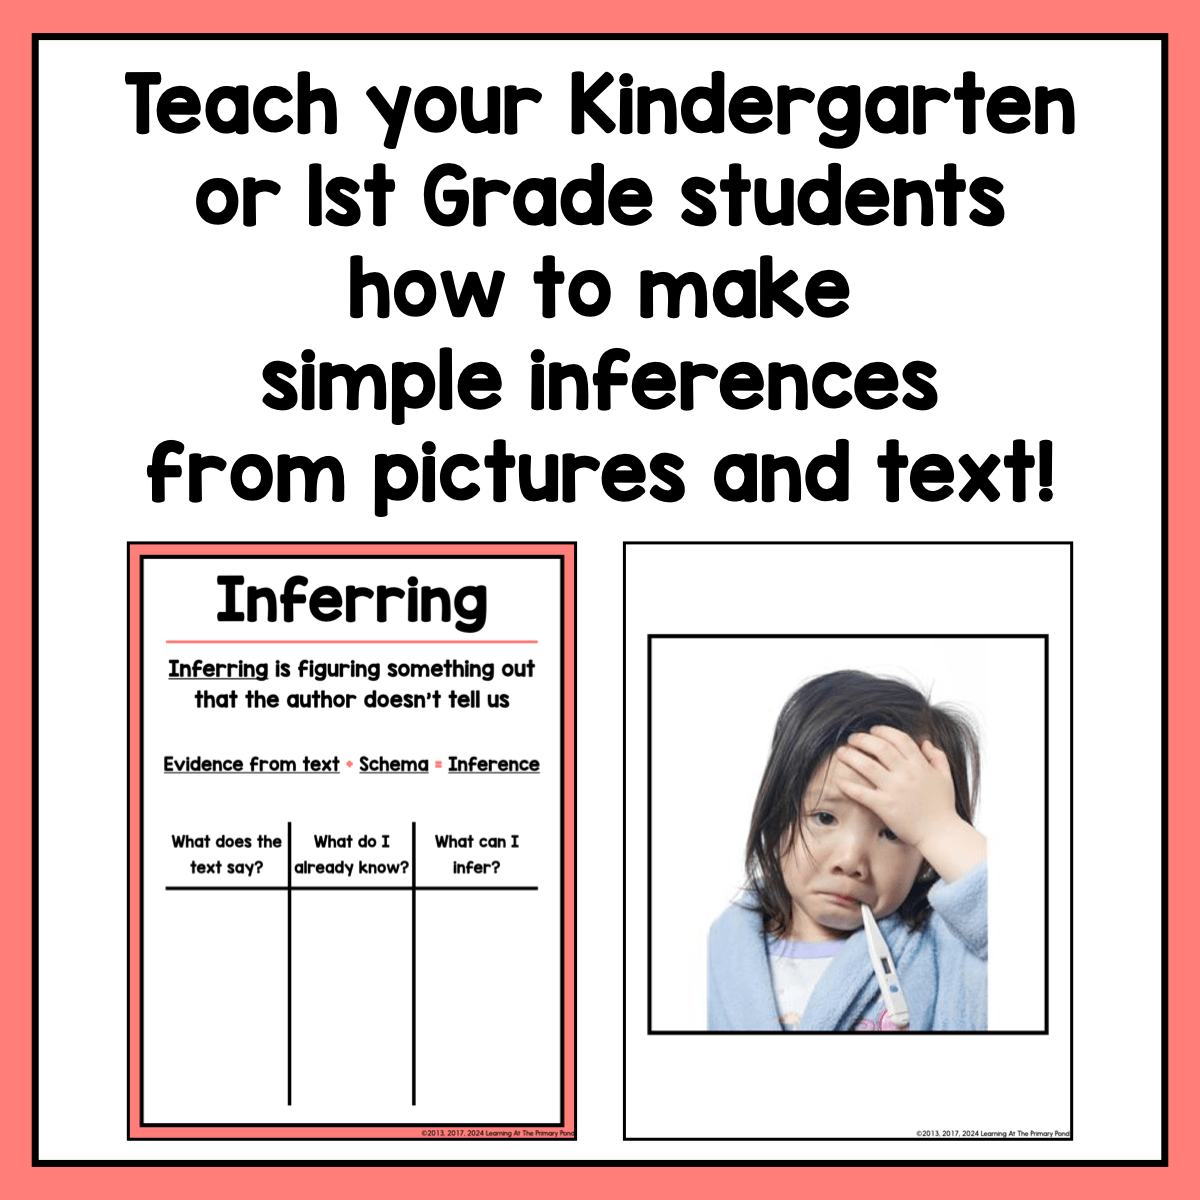 Reading Comprehension Lesson Plans for K-1 {Unit 9: Making Inferences} - learning-at-the-primary-pond